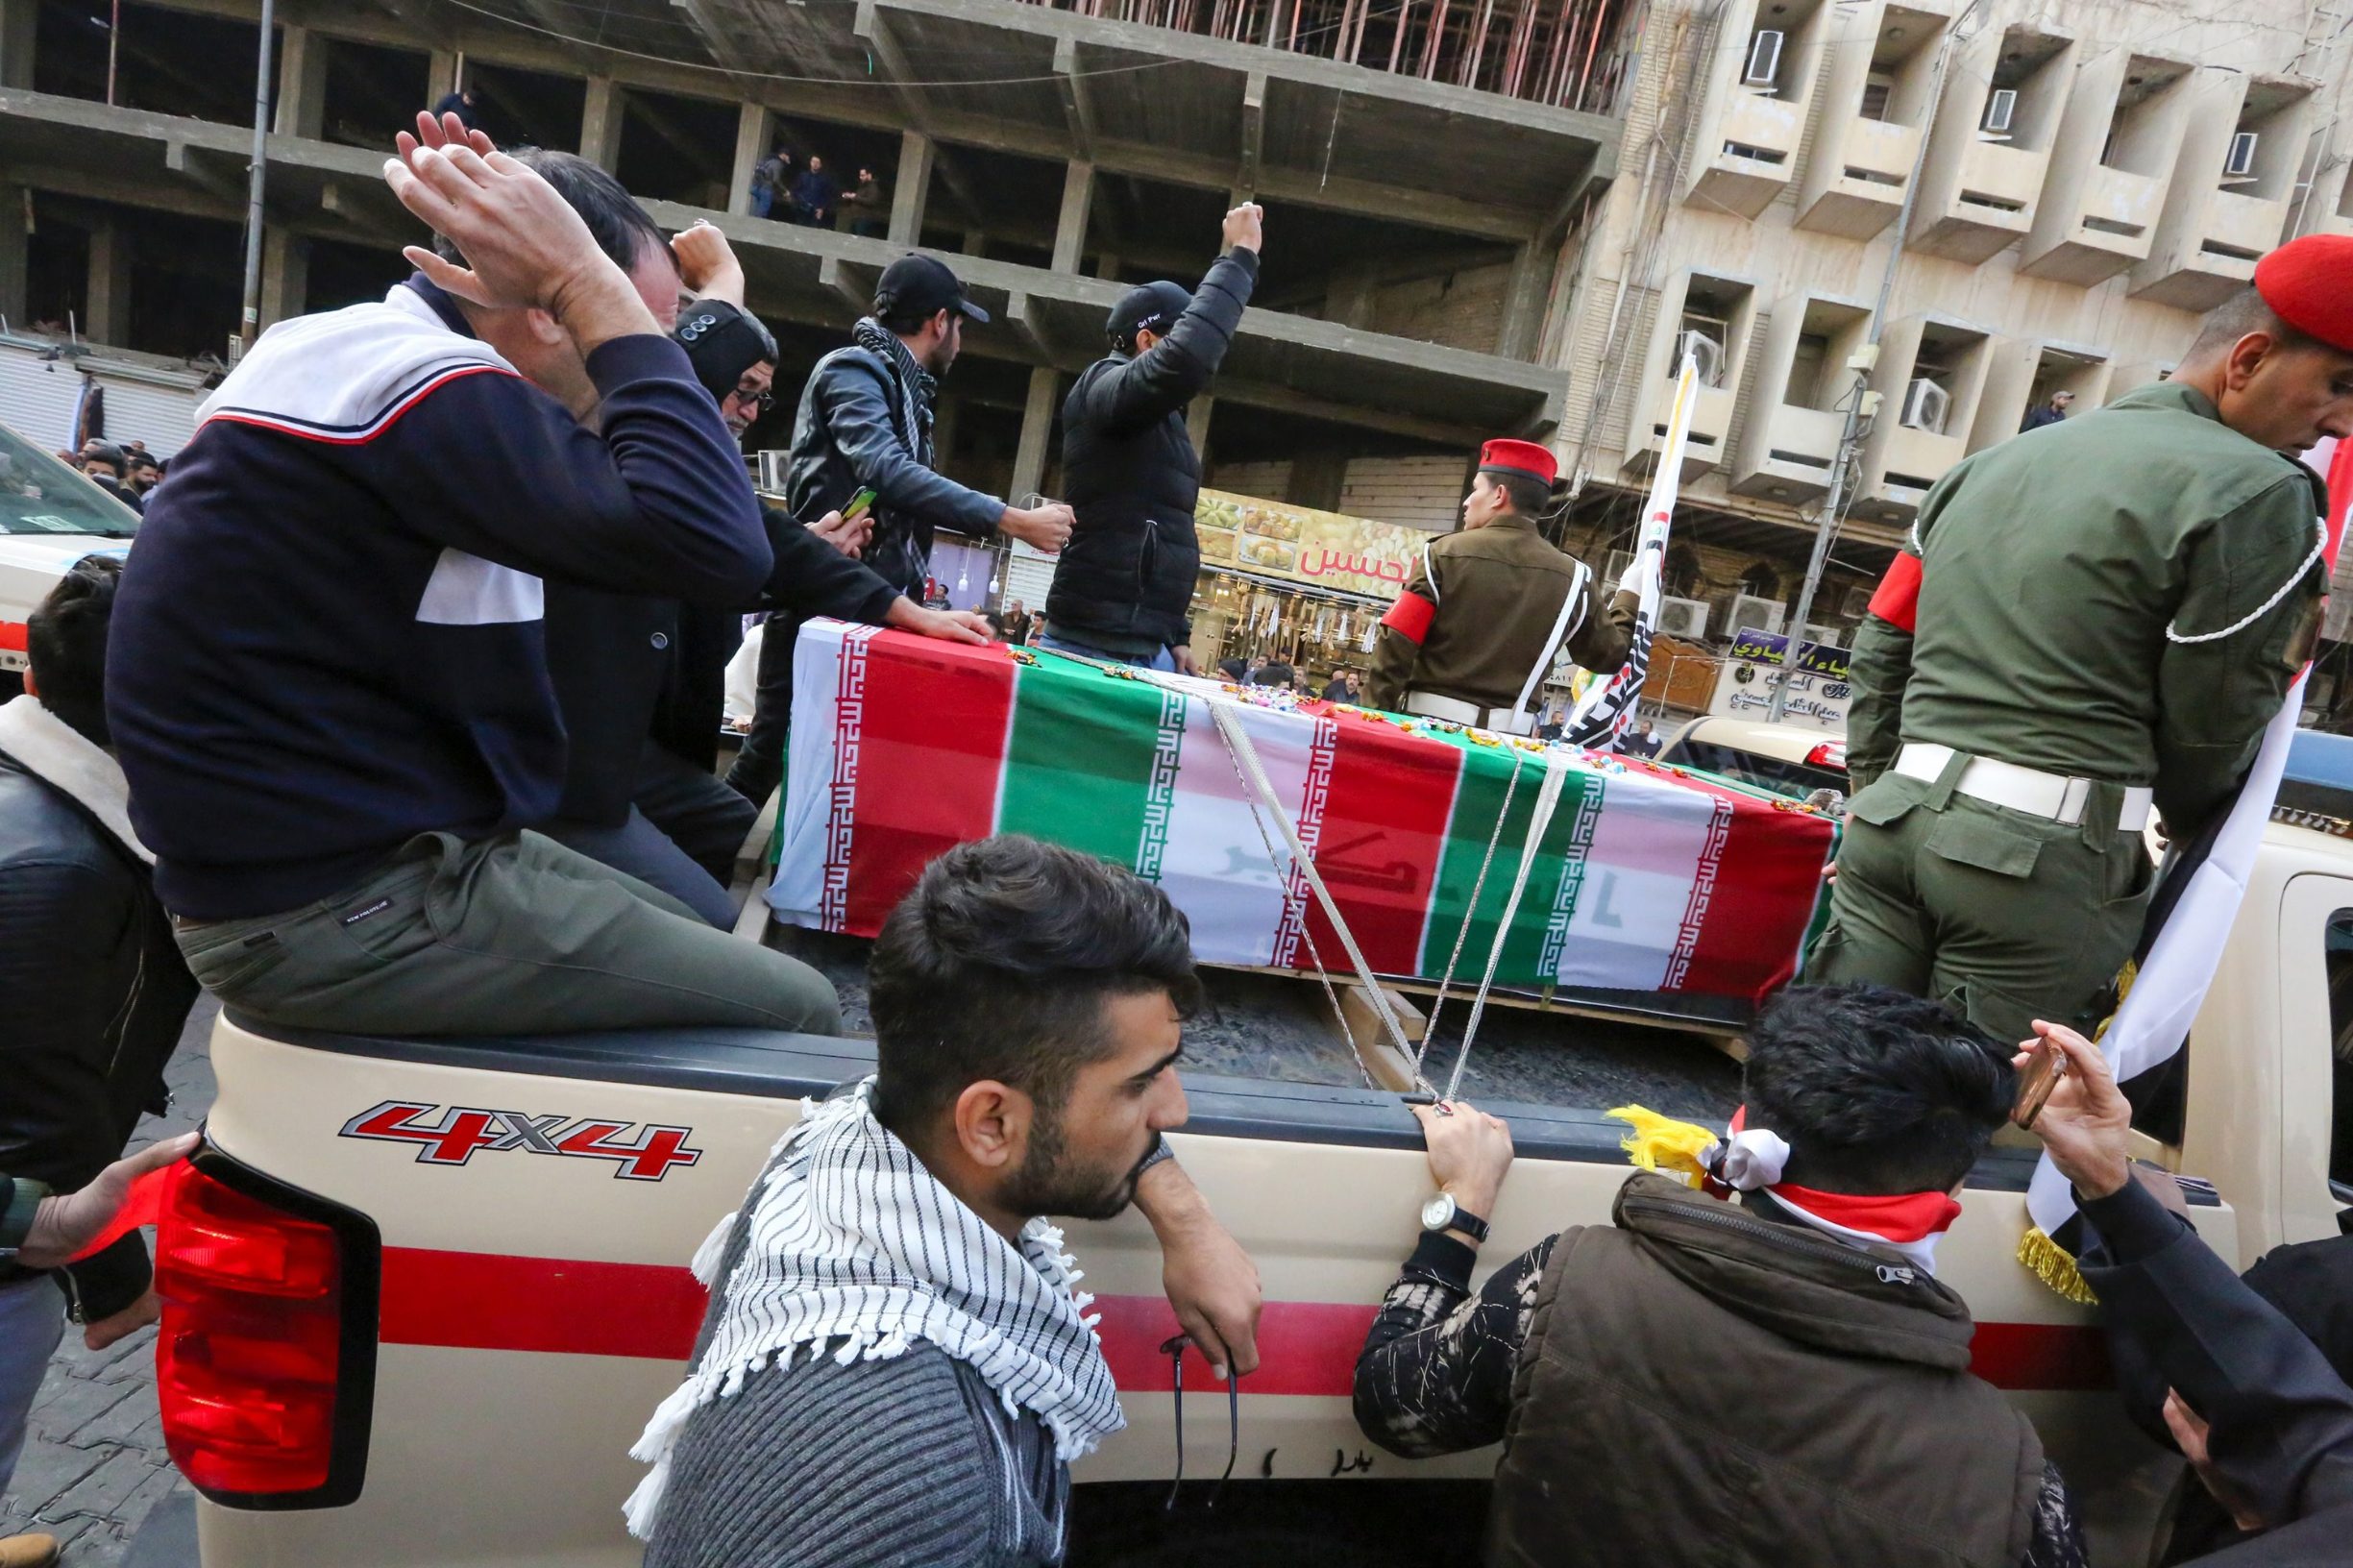 Iraqis mourn over a coffin during the funeral procession of Iraqi paramilitary chief Abu Mahdi al-Muhandis and Iranian military commander Qasem Soleimani, and eight others, in Kadhimiya, a Shiite pilgrimage district of Baghdad, on January 4, 2020. - Thousands of Iraqis chanting 